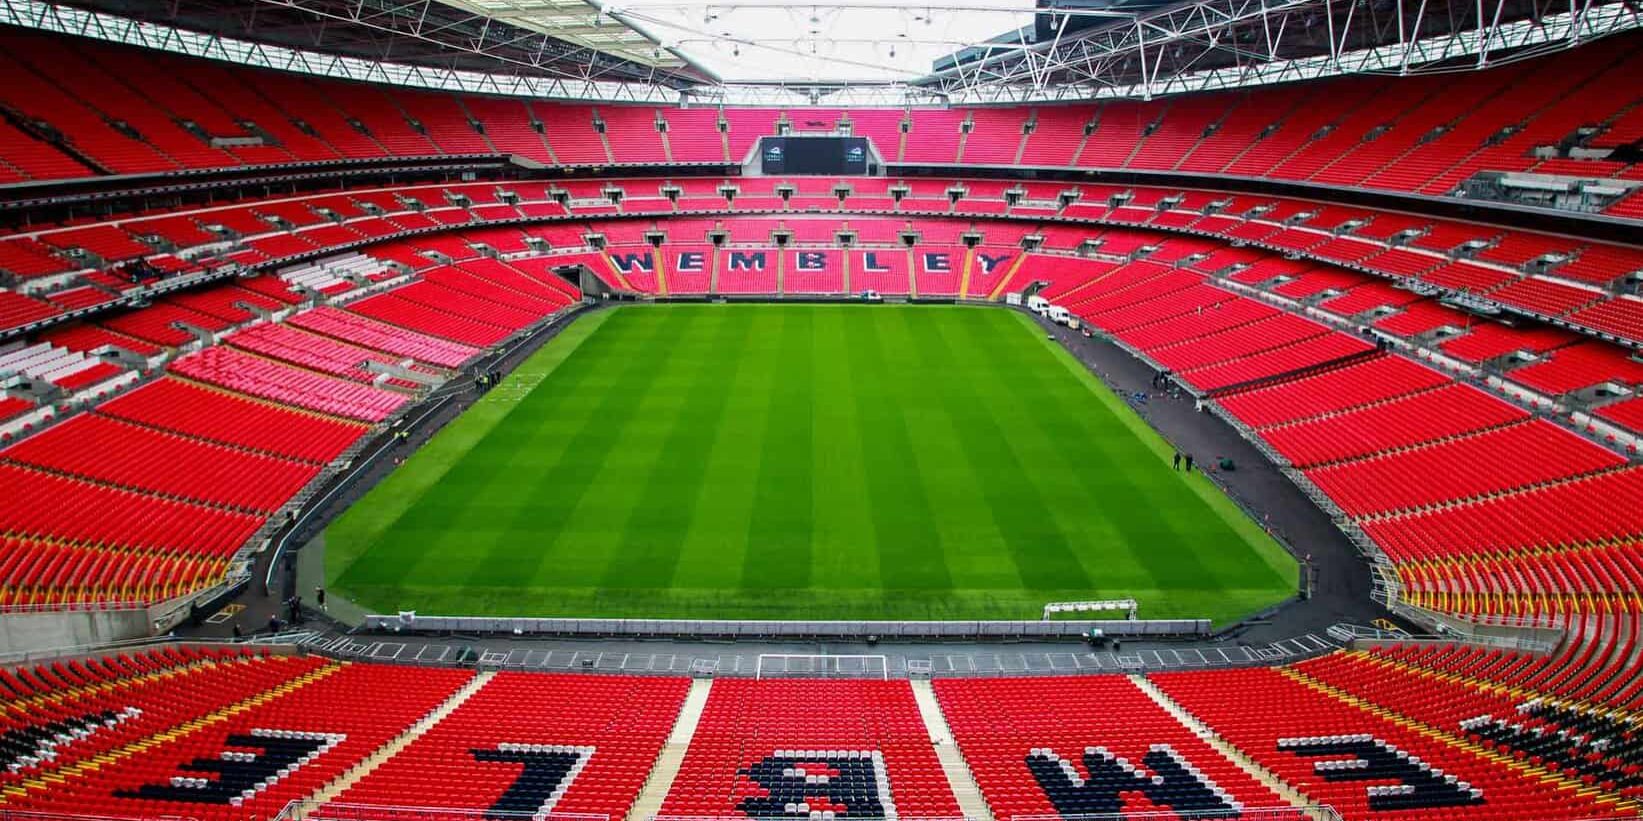 LONDON, ENGLAND - FEBRUARY 23 :   General view of the pitch during a Carling Cup Final preview at Wembley Stadium on February 23, 2011 in London, England.  (Photo by Jan Kruger - The FA/The FA via Getty Images)